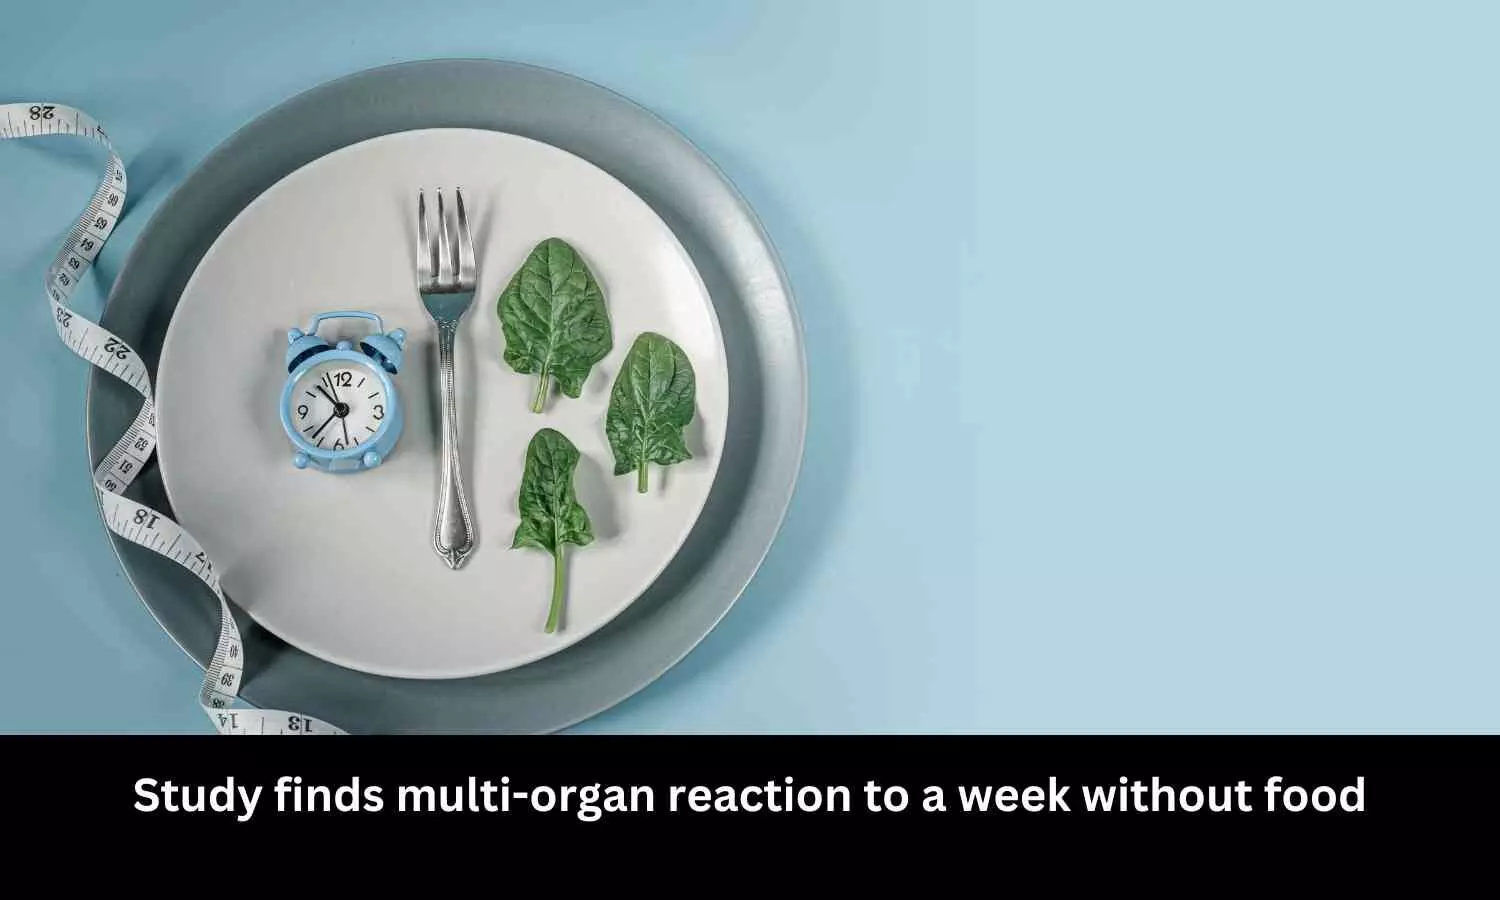 Study finds multi-organ reaction to a week without food